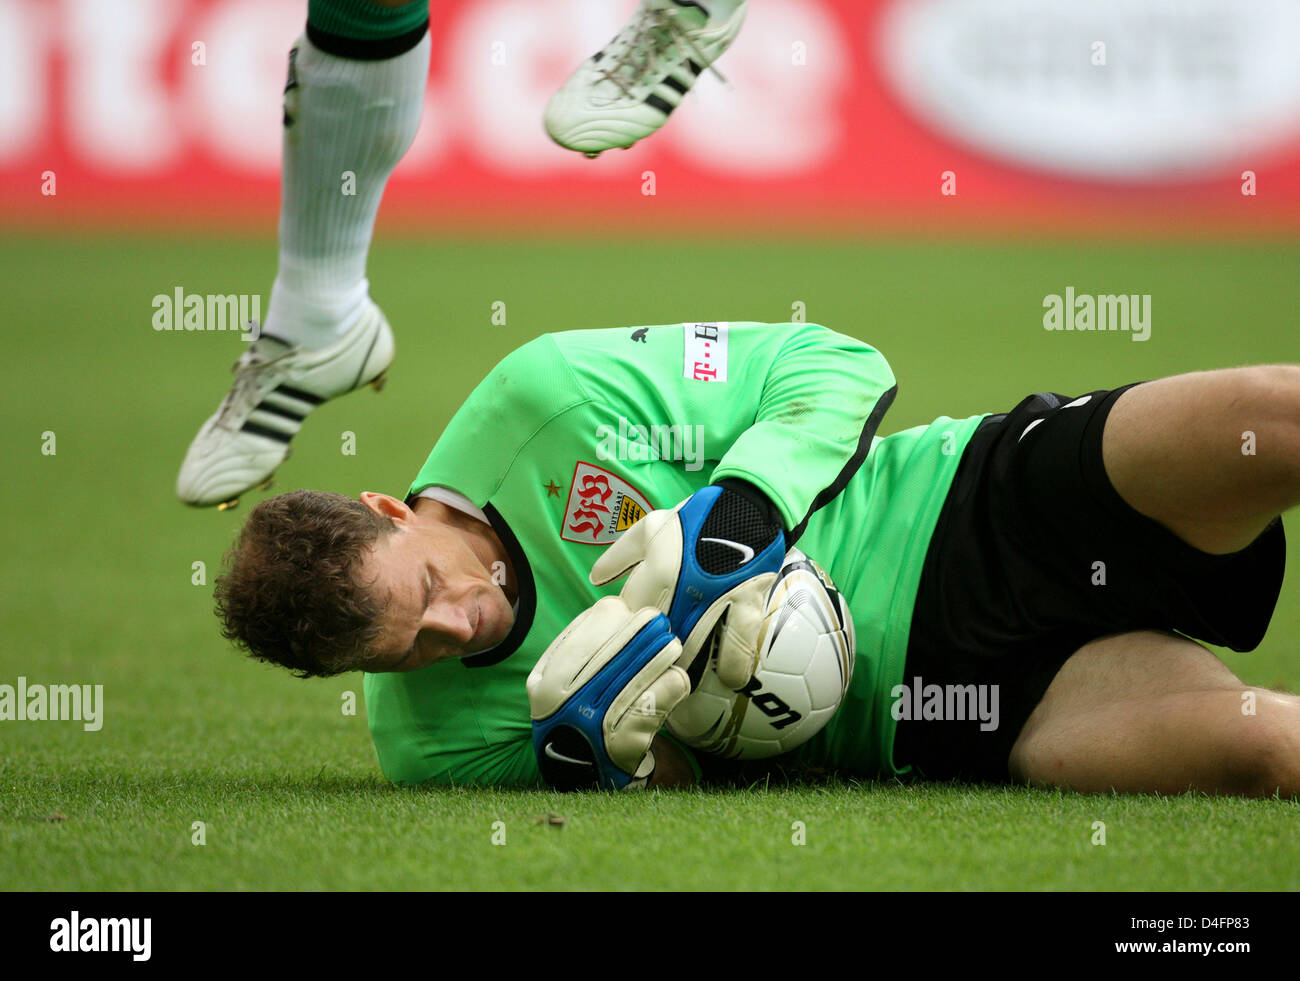 VfB Stuttgart goalkeeper Jens Lehmann grabs the ball just before a Borussia Moenchengladbach player can reach it during the Bundesliga match at Borussia-Park in Moenchengladbach, Germany, 17 August 2008. Photo: ROLF VENNENBERND (ATTENTION: EMBARGO CONDITIONS! The DFL permits the further utilisation of the pictures in IPTV, mobile services and other new technologies no earlier than  Stock Photo